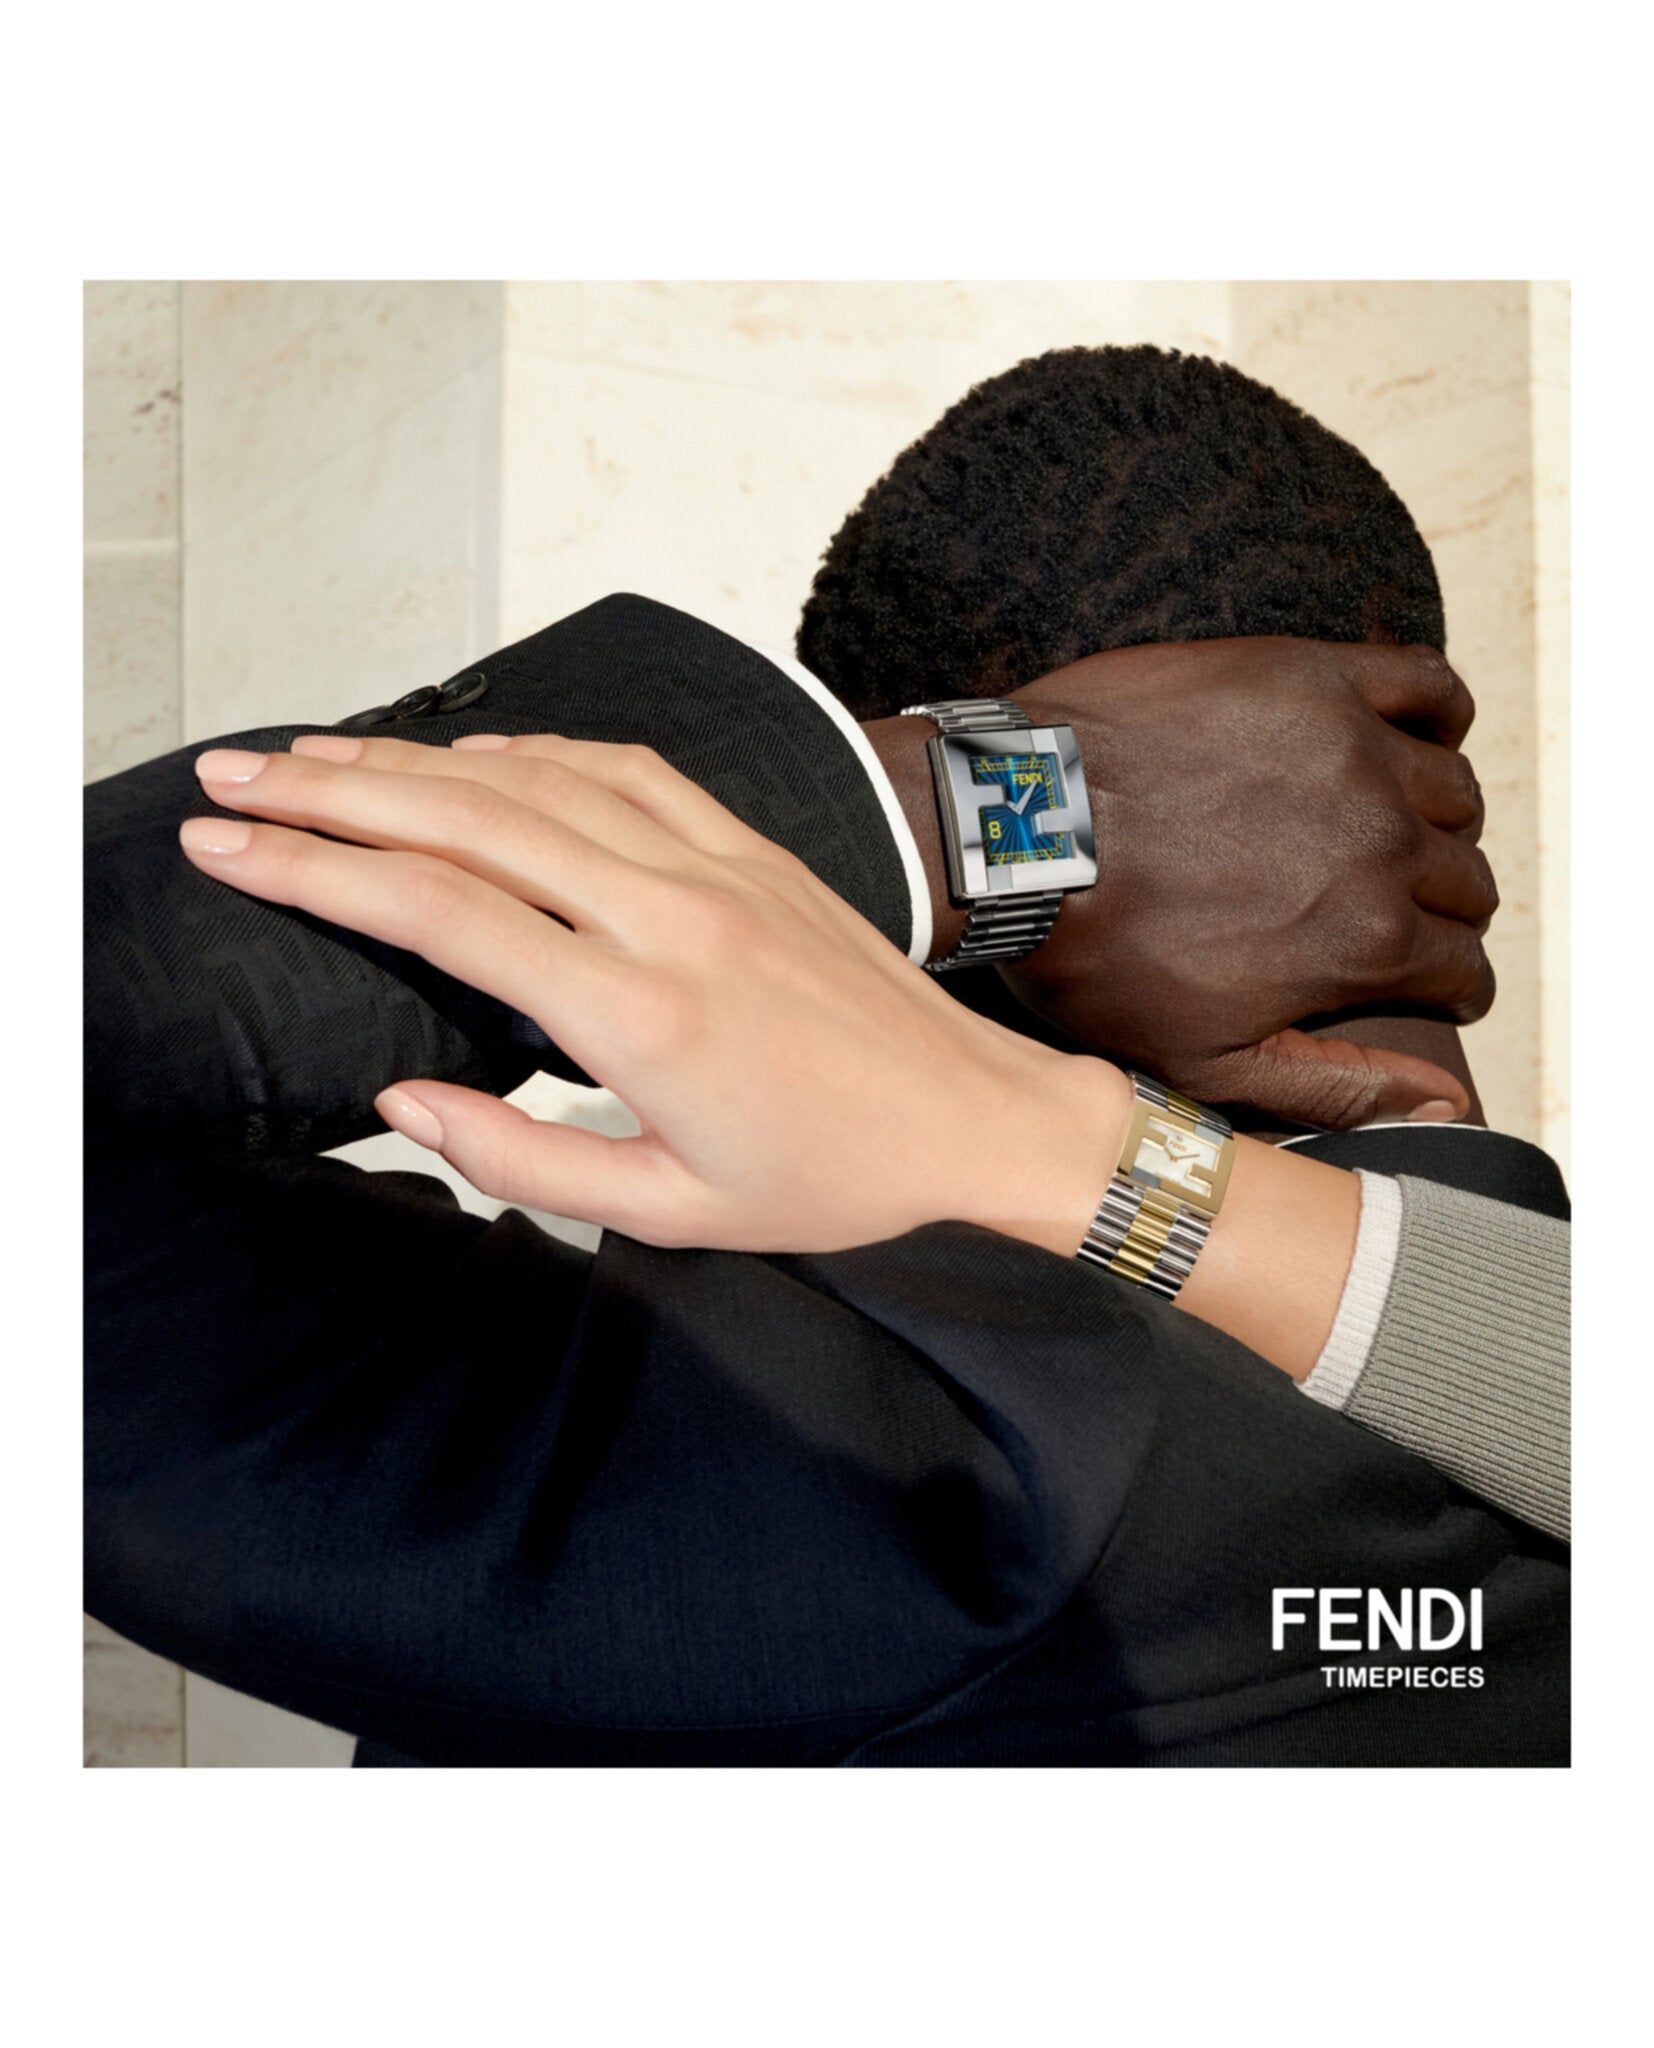 Fendi Mens Fendimania Watches | MadaLuxe Time – Madaluxe Time